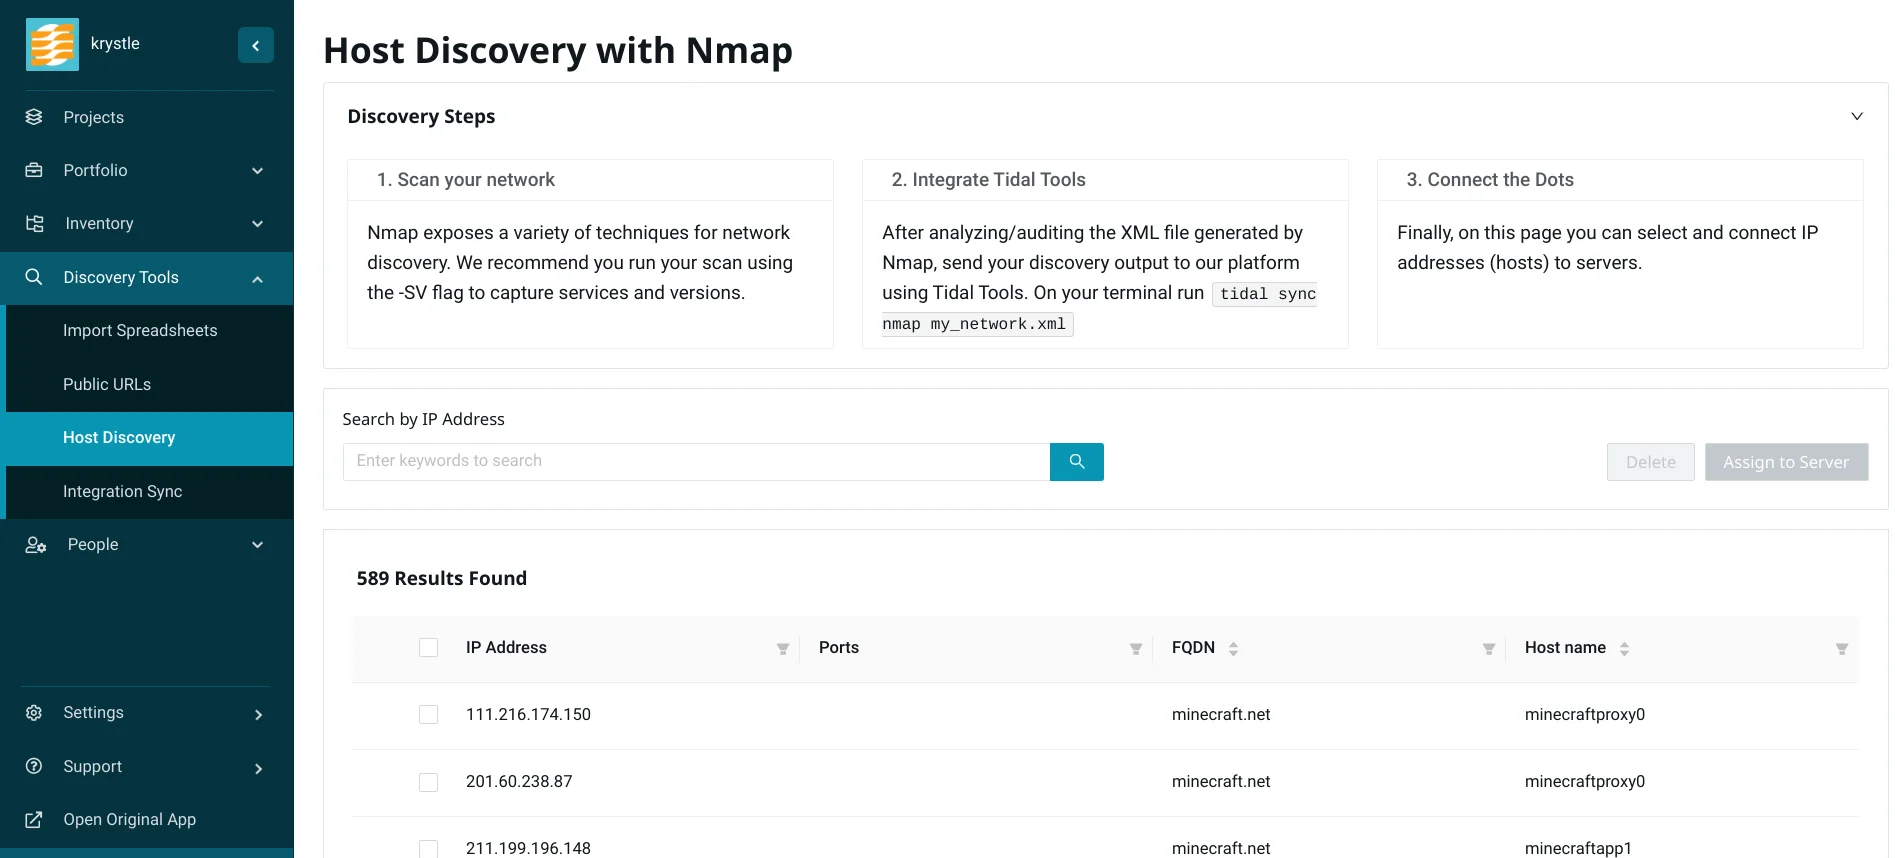 Host Discovery with Nmap